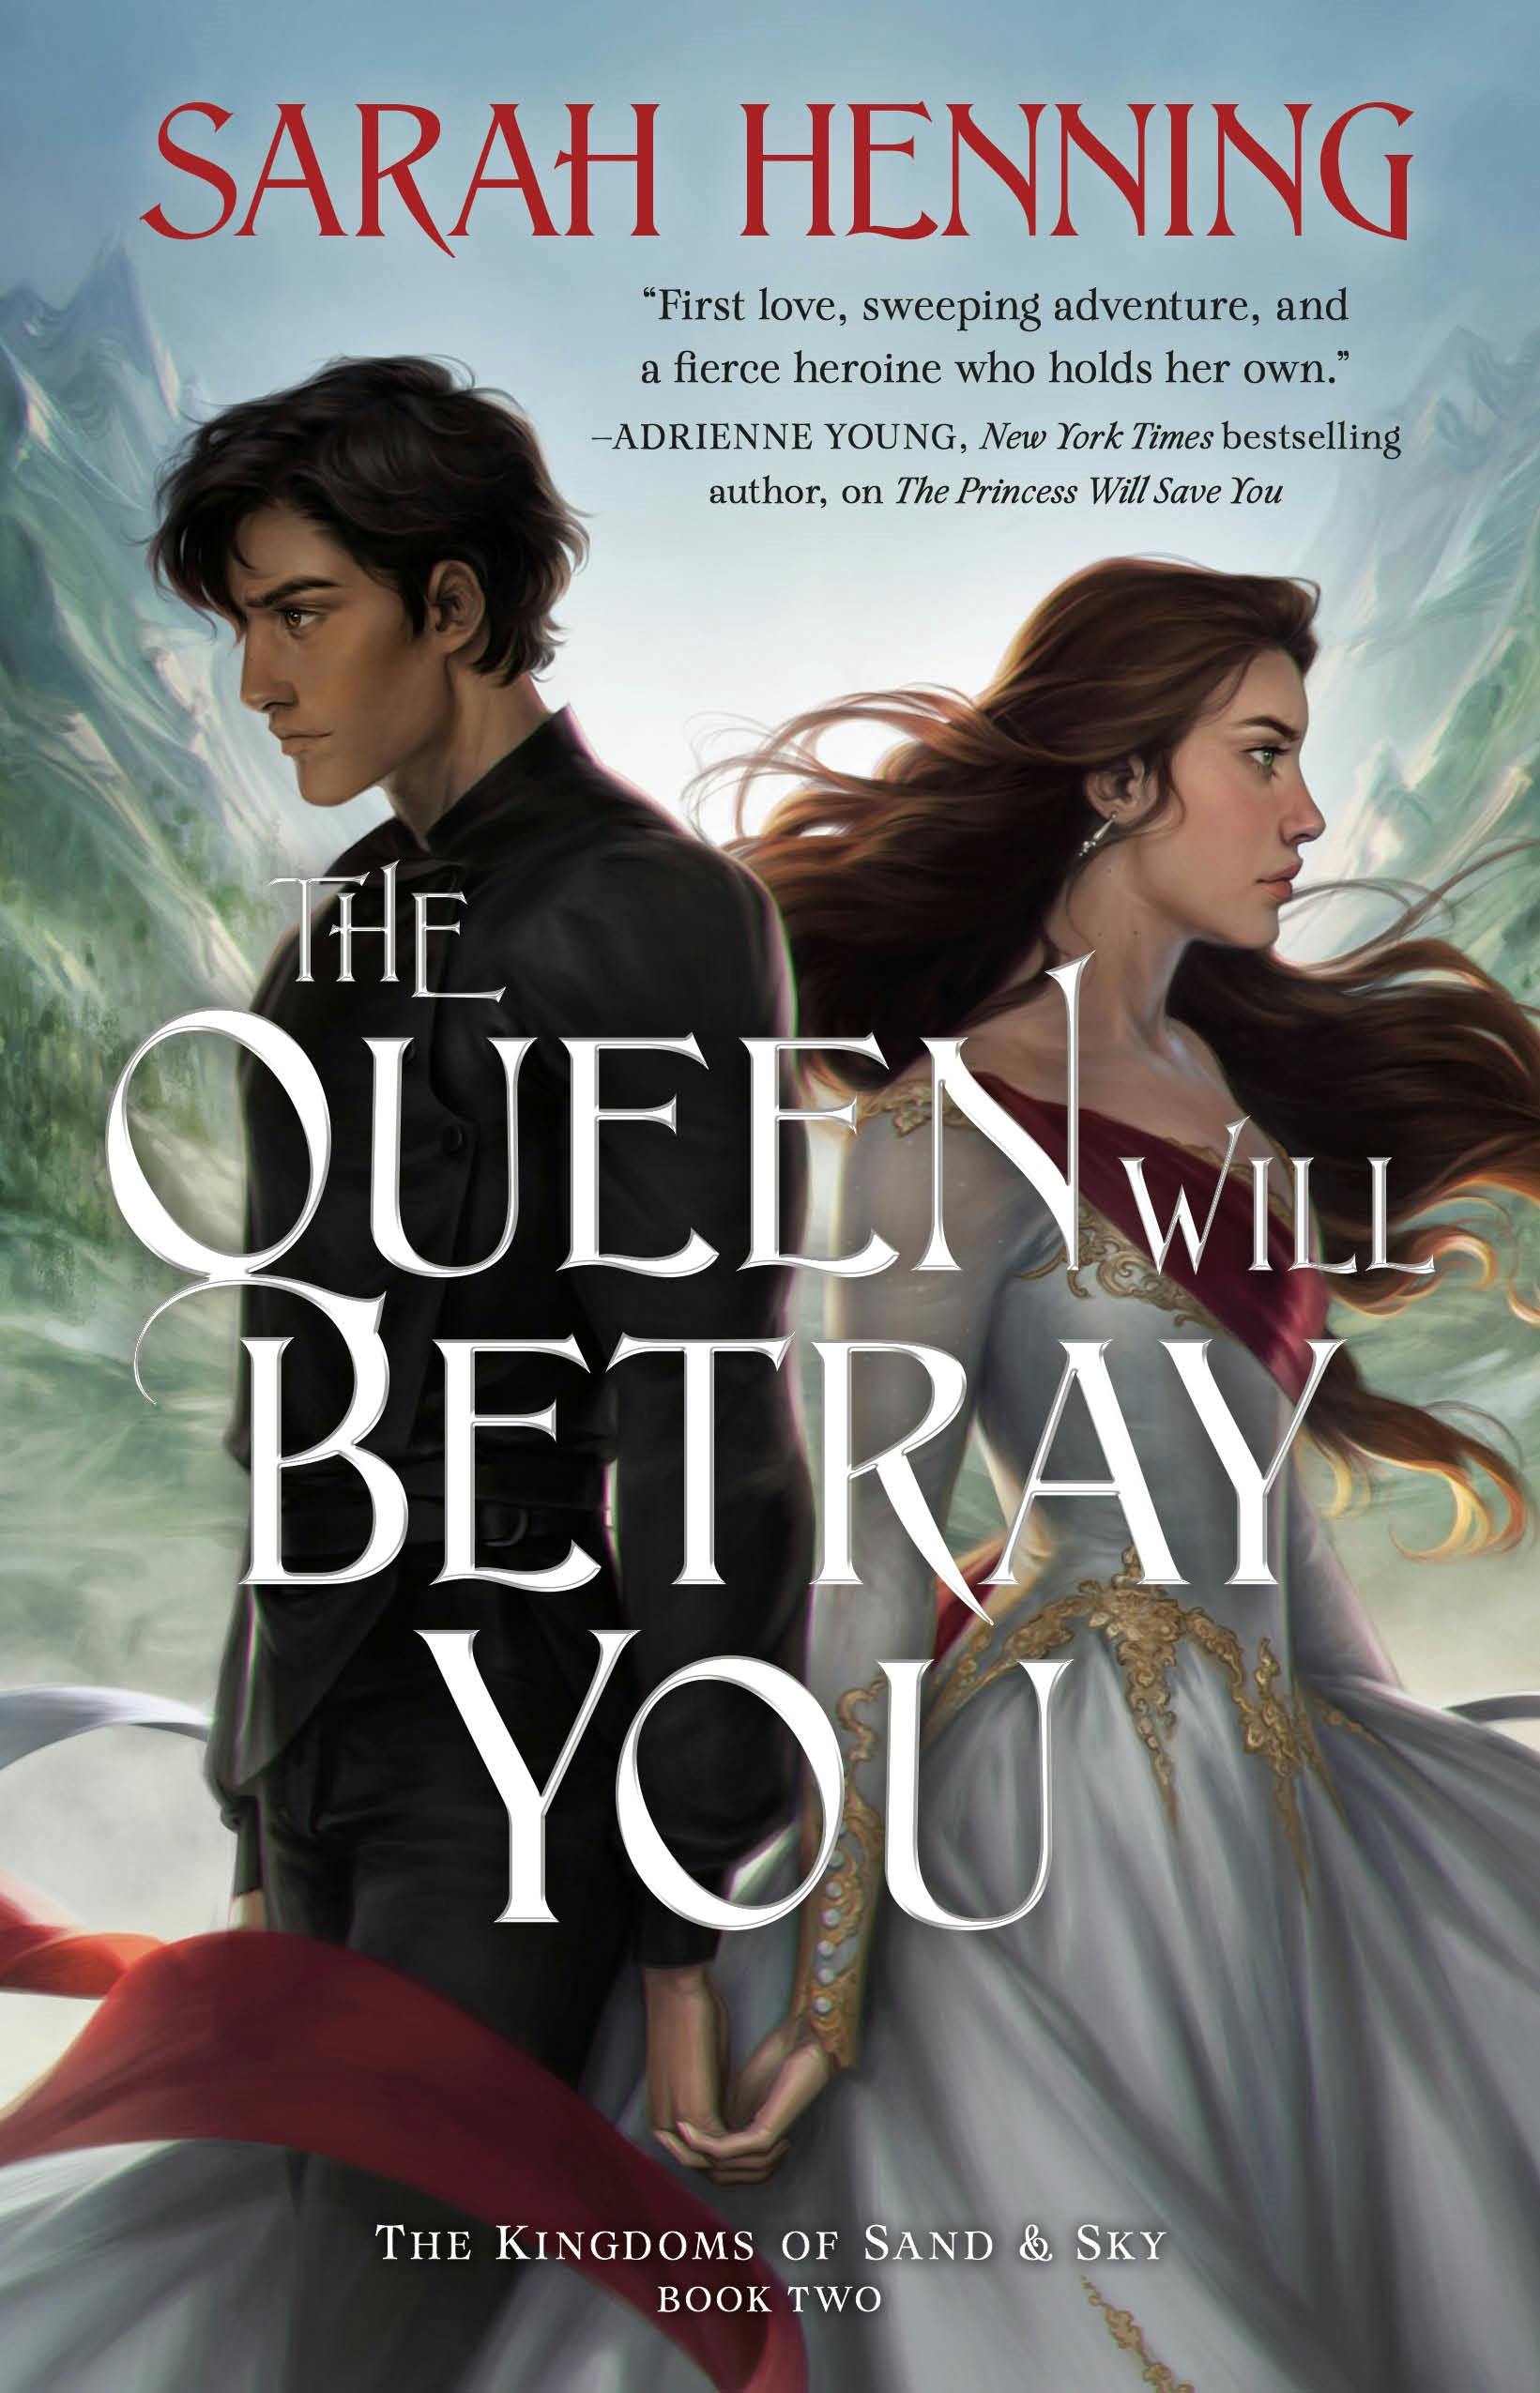 Cover for the book titled as: The Queen Will Betray You